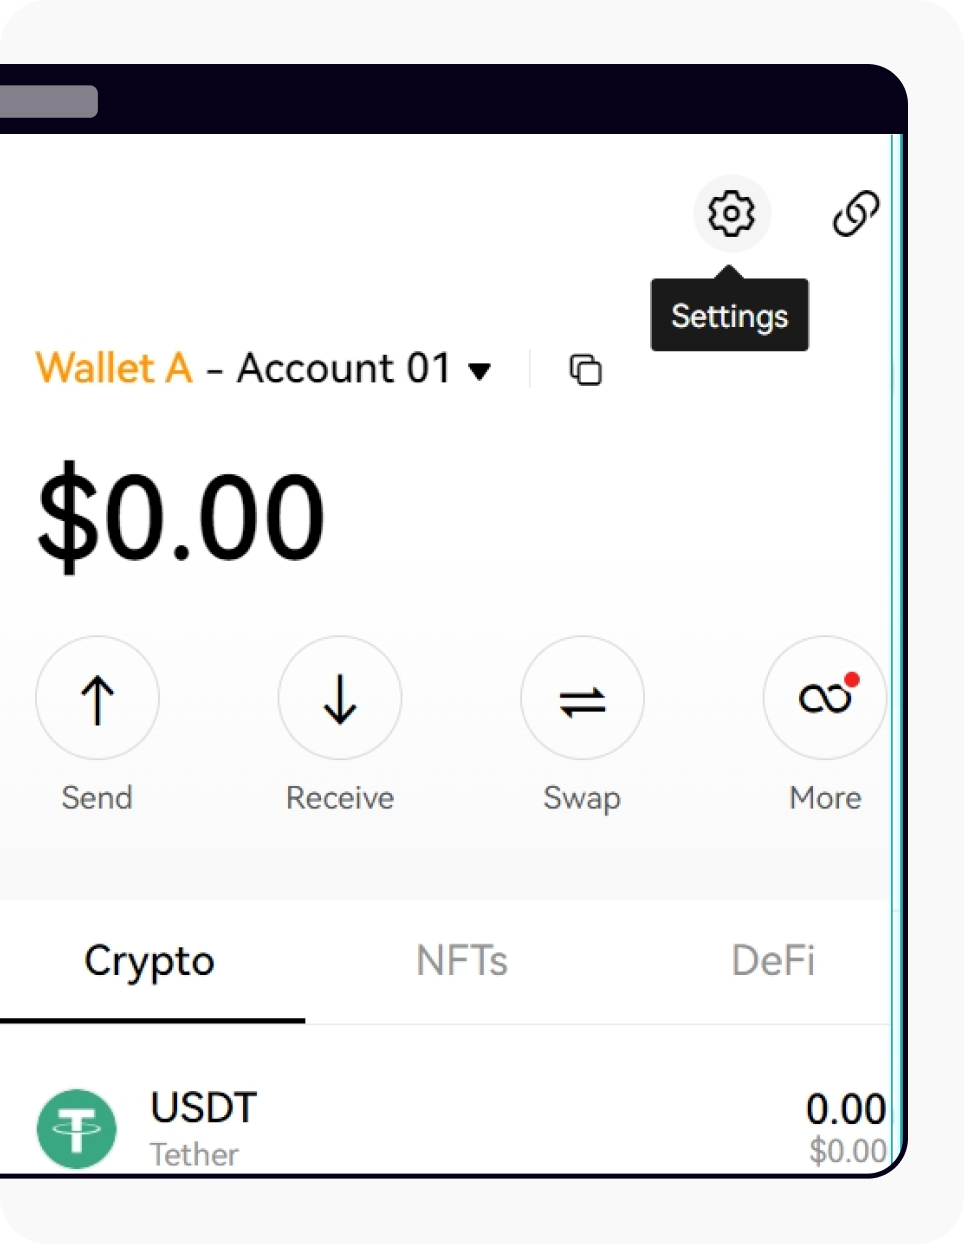 If you already connected an OKX wallet, select settings in the top right corner to add wallet